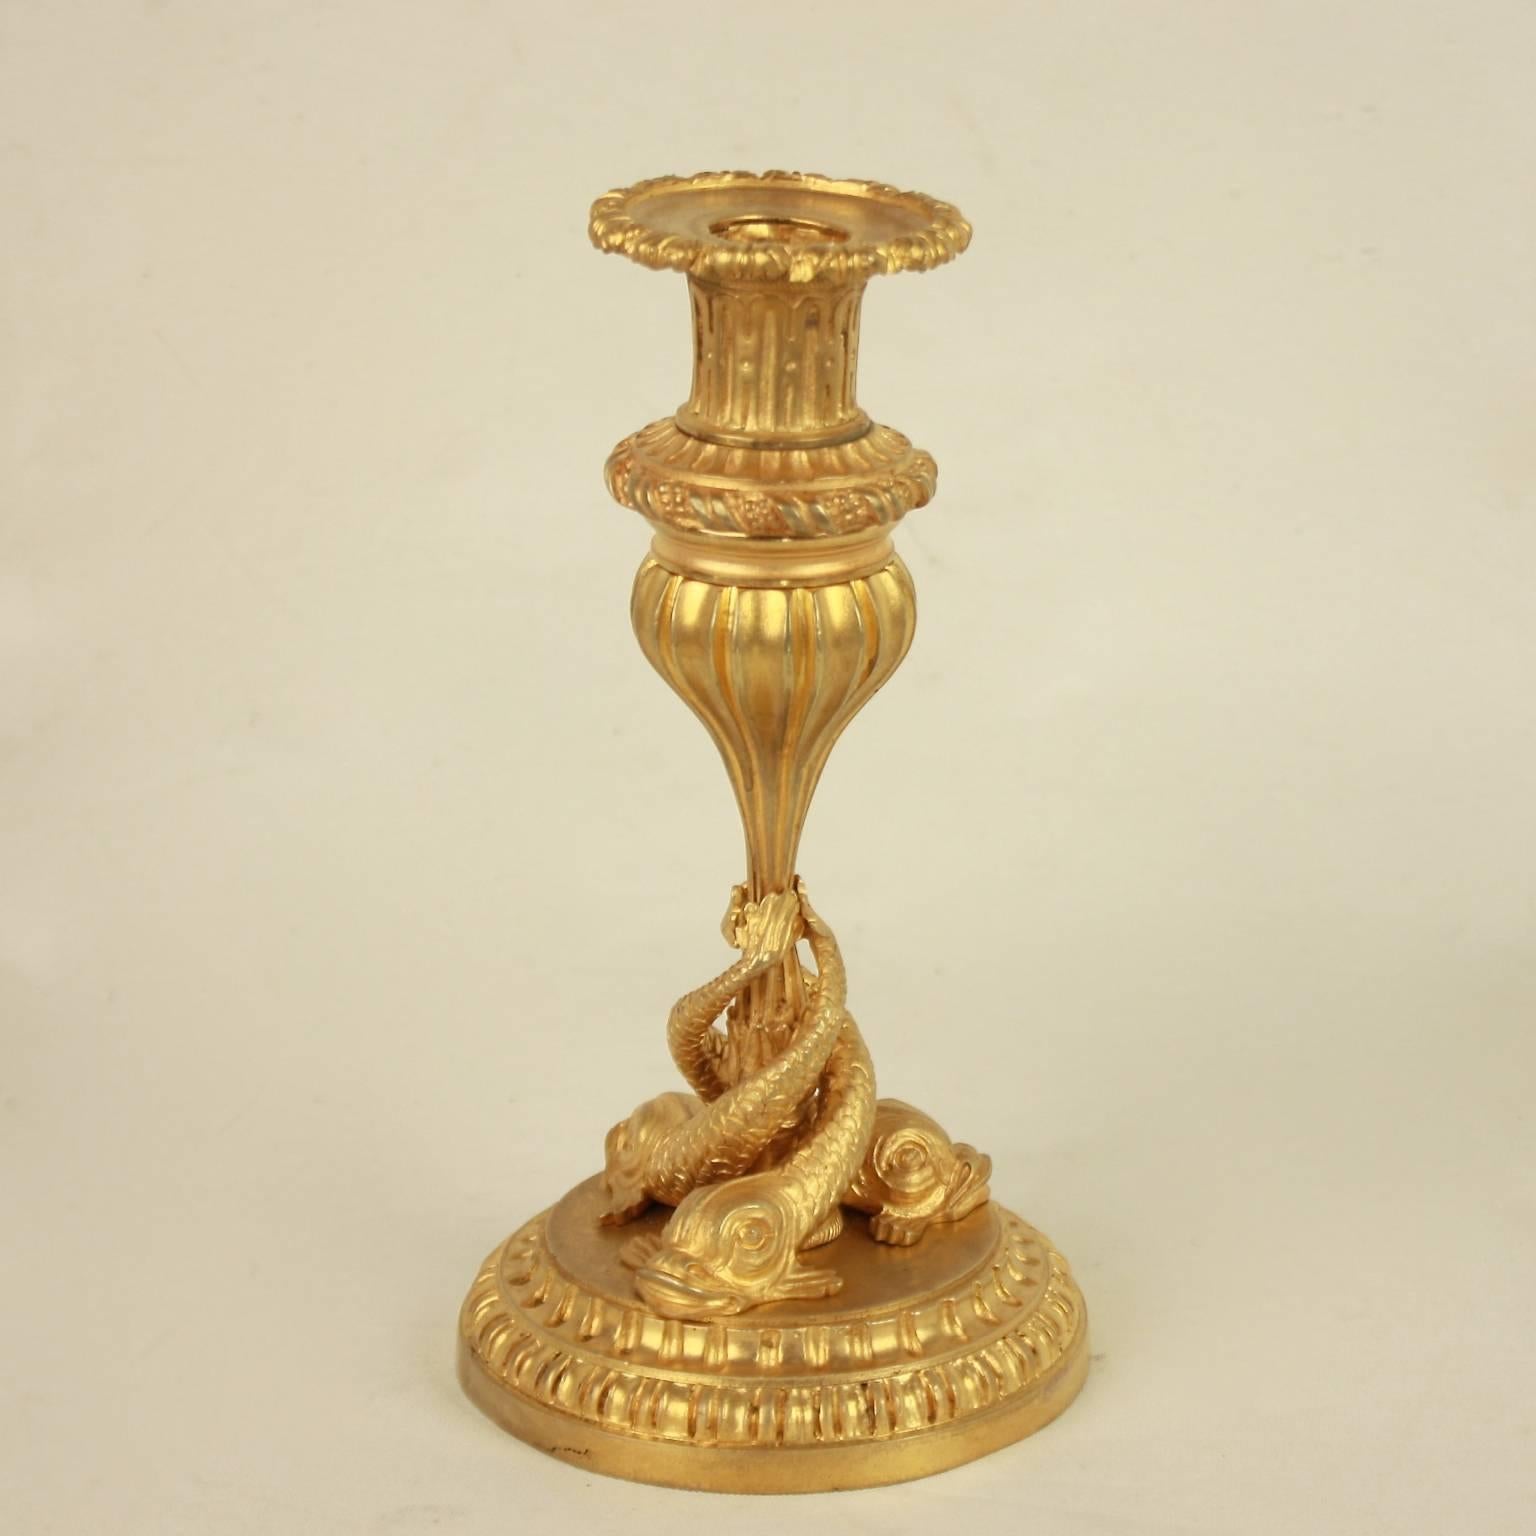 A fine pair of Louis XVI style ormolu candlesticks with entwined dolphins. Three entwined finely chased dolphins forming the shaft above a fluted circular base. The socket and drib plates similarily fluted as the base with a twisted ribbon motif.